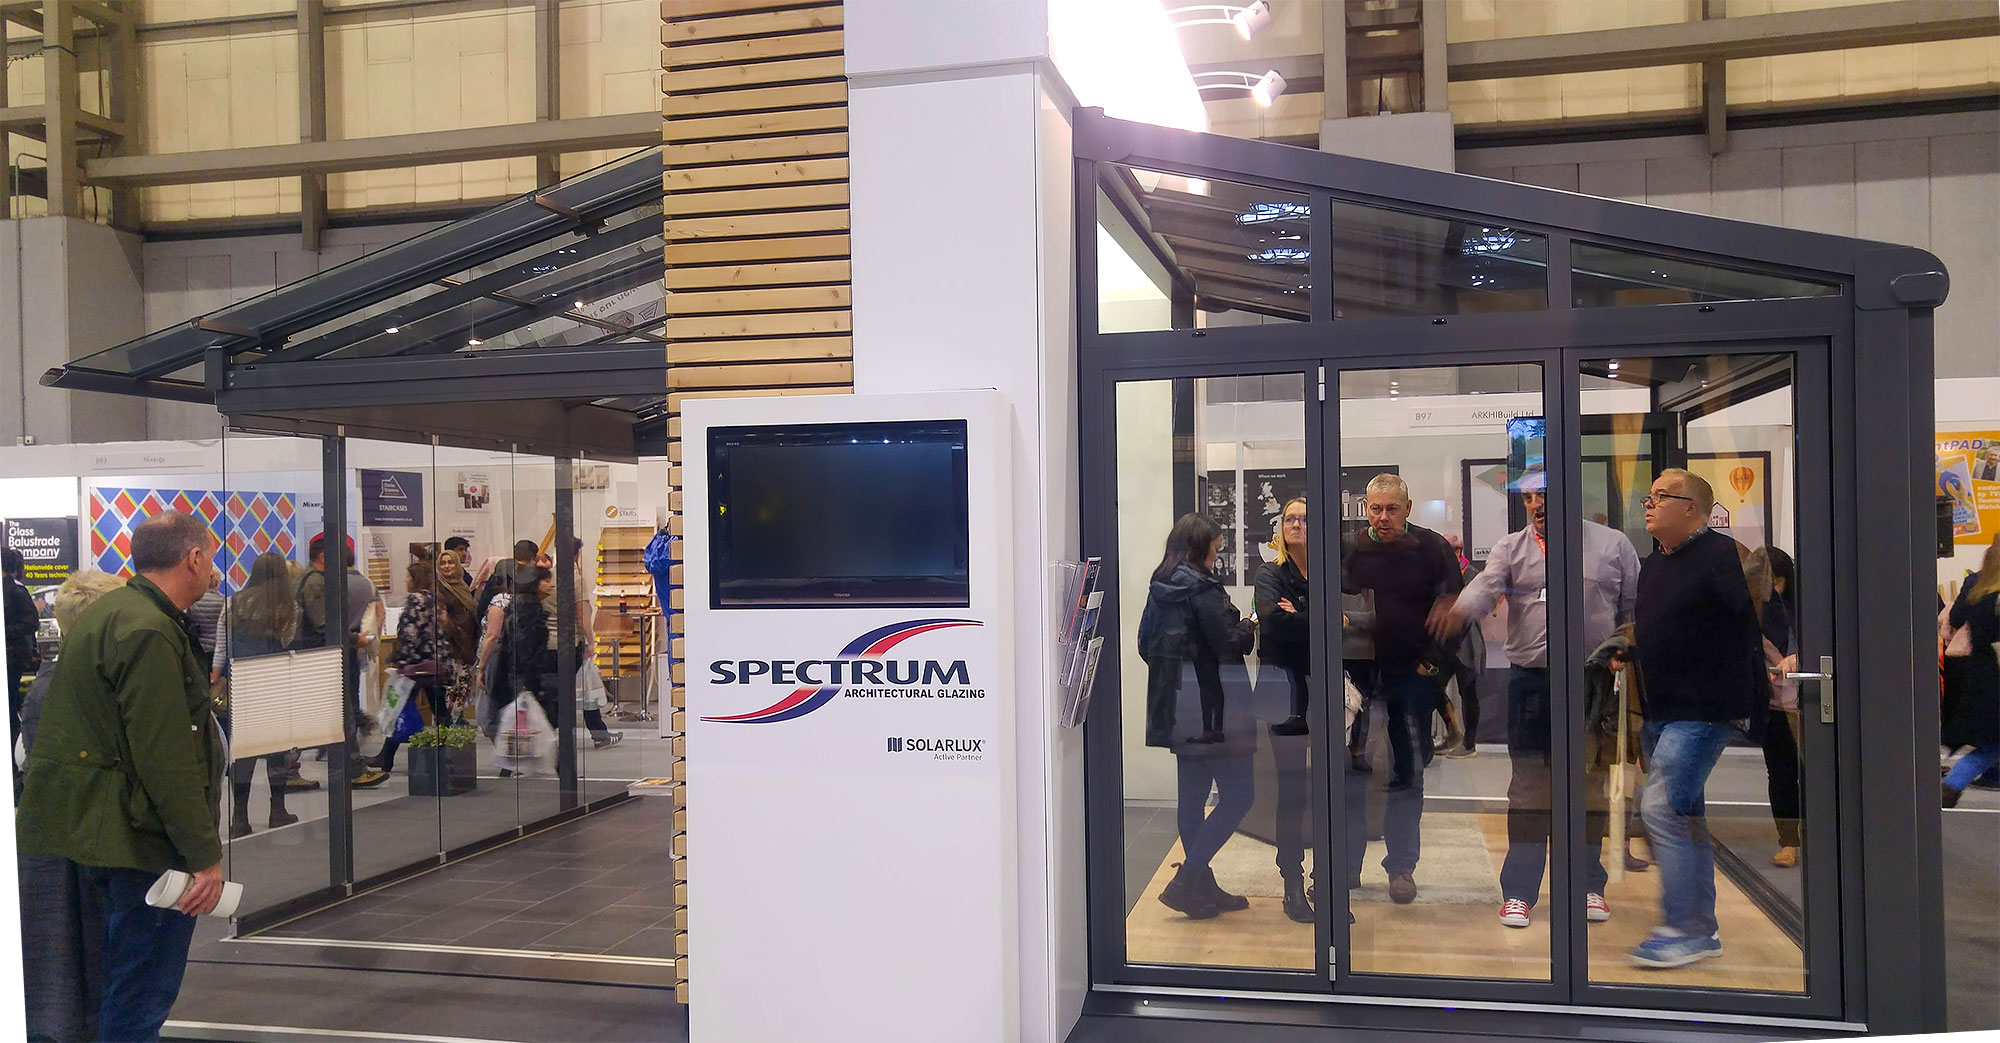 The Spectrum stand at Grand Designs Live 2018